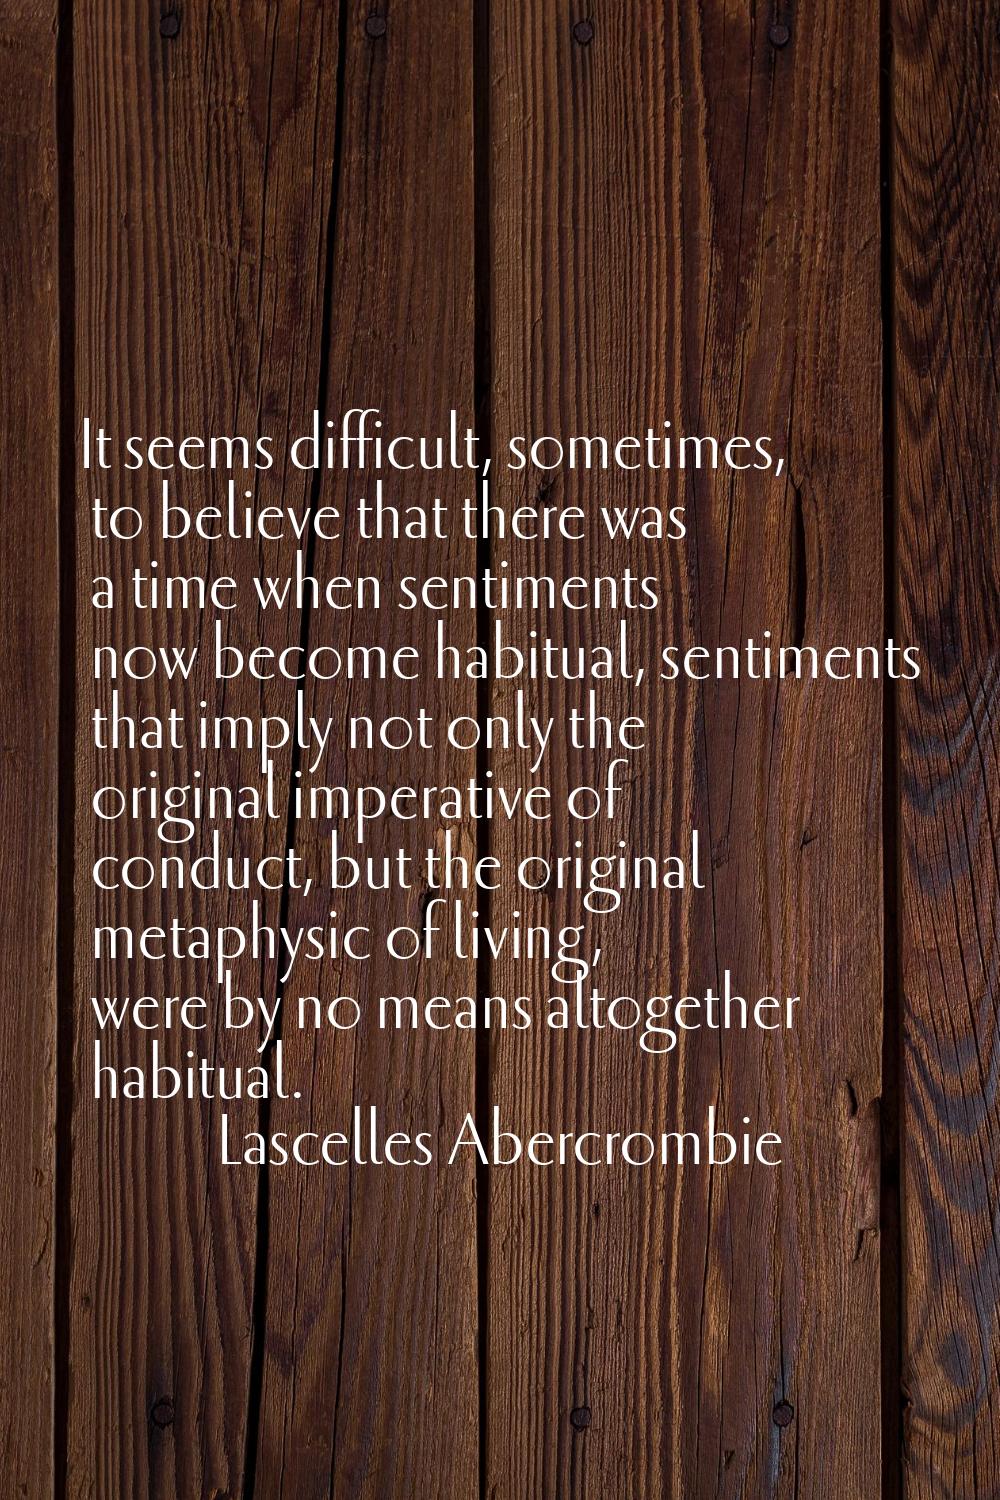 It seems difficult, sometimes, to believe that there was a time when sentiments now become habitual